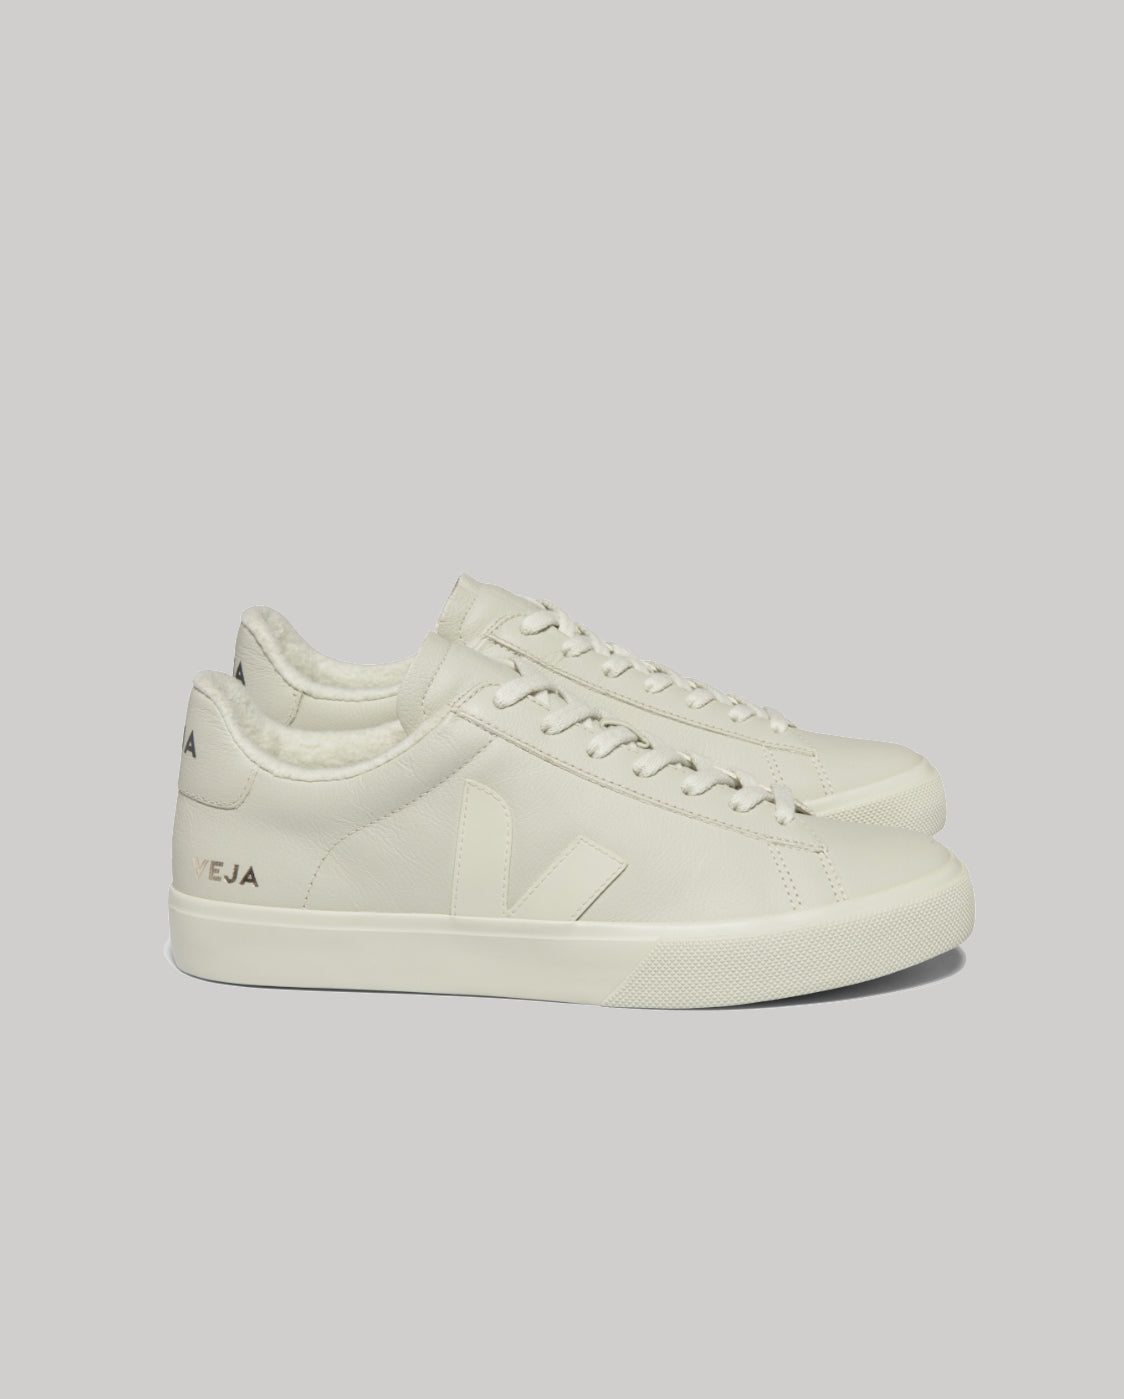 Veja Pack Woman Campo Full-Pierre